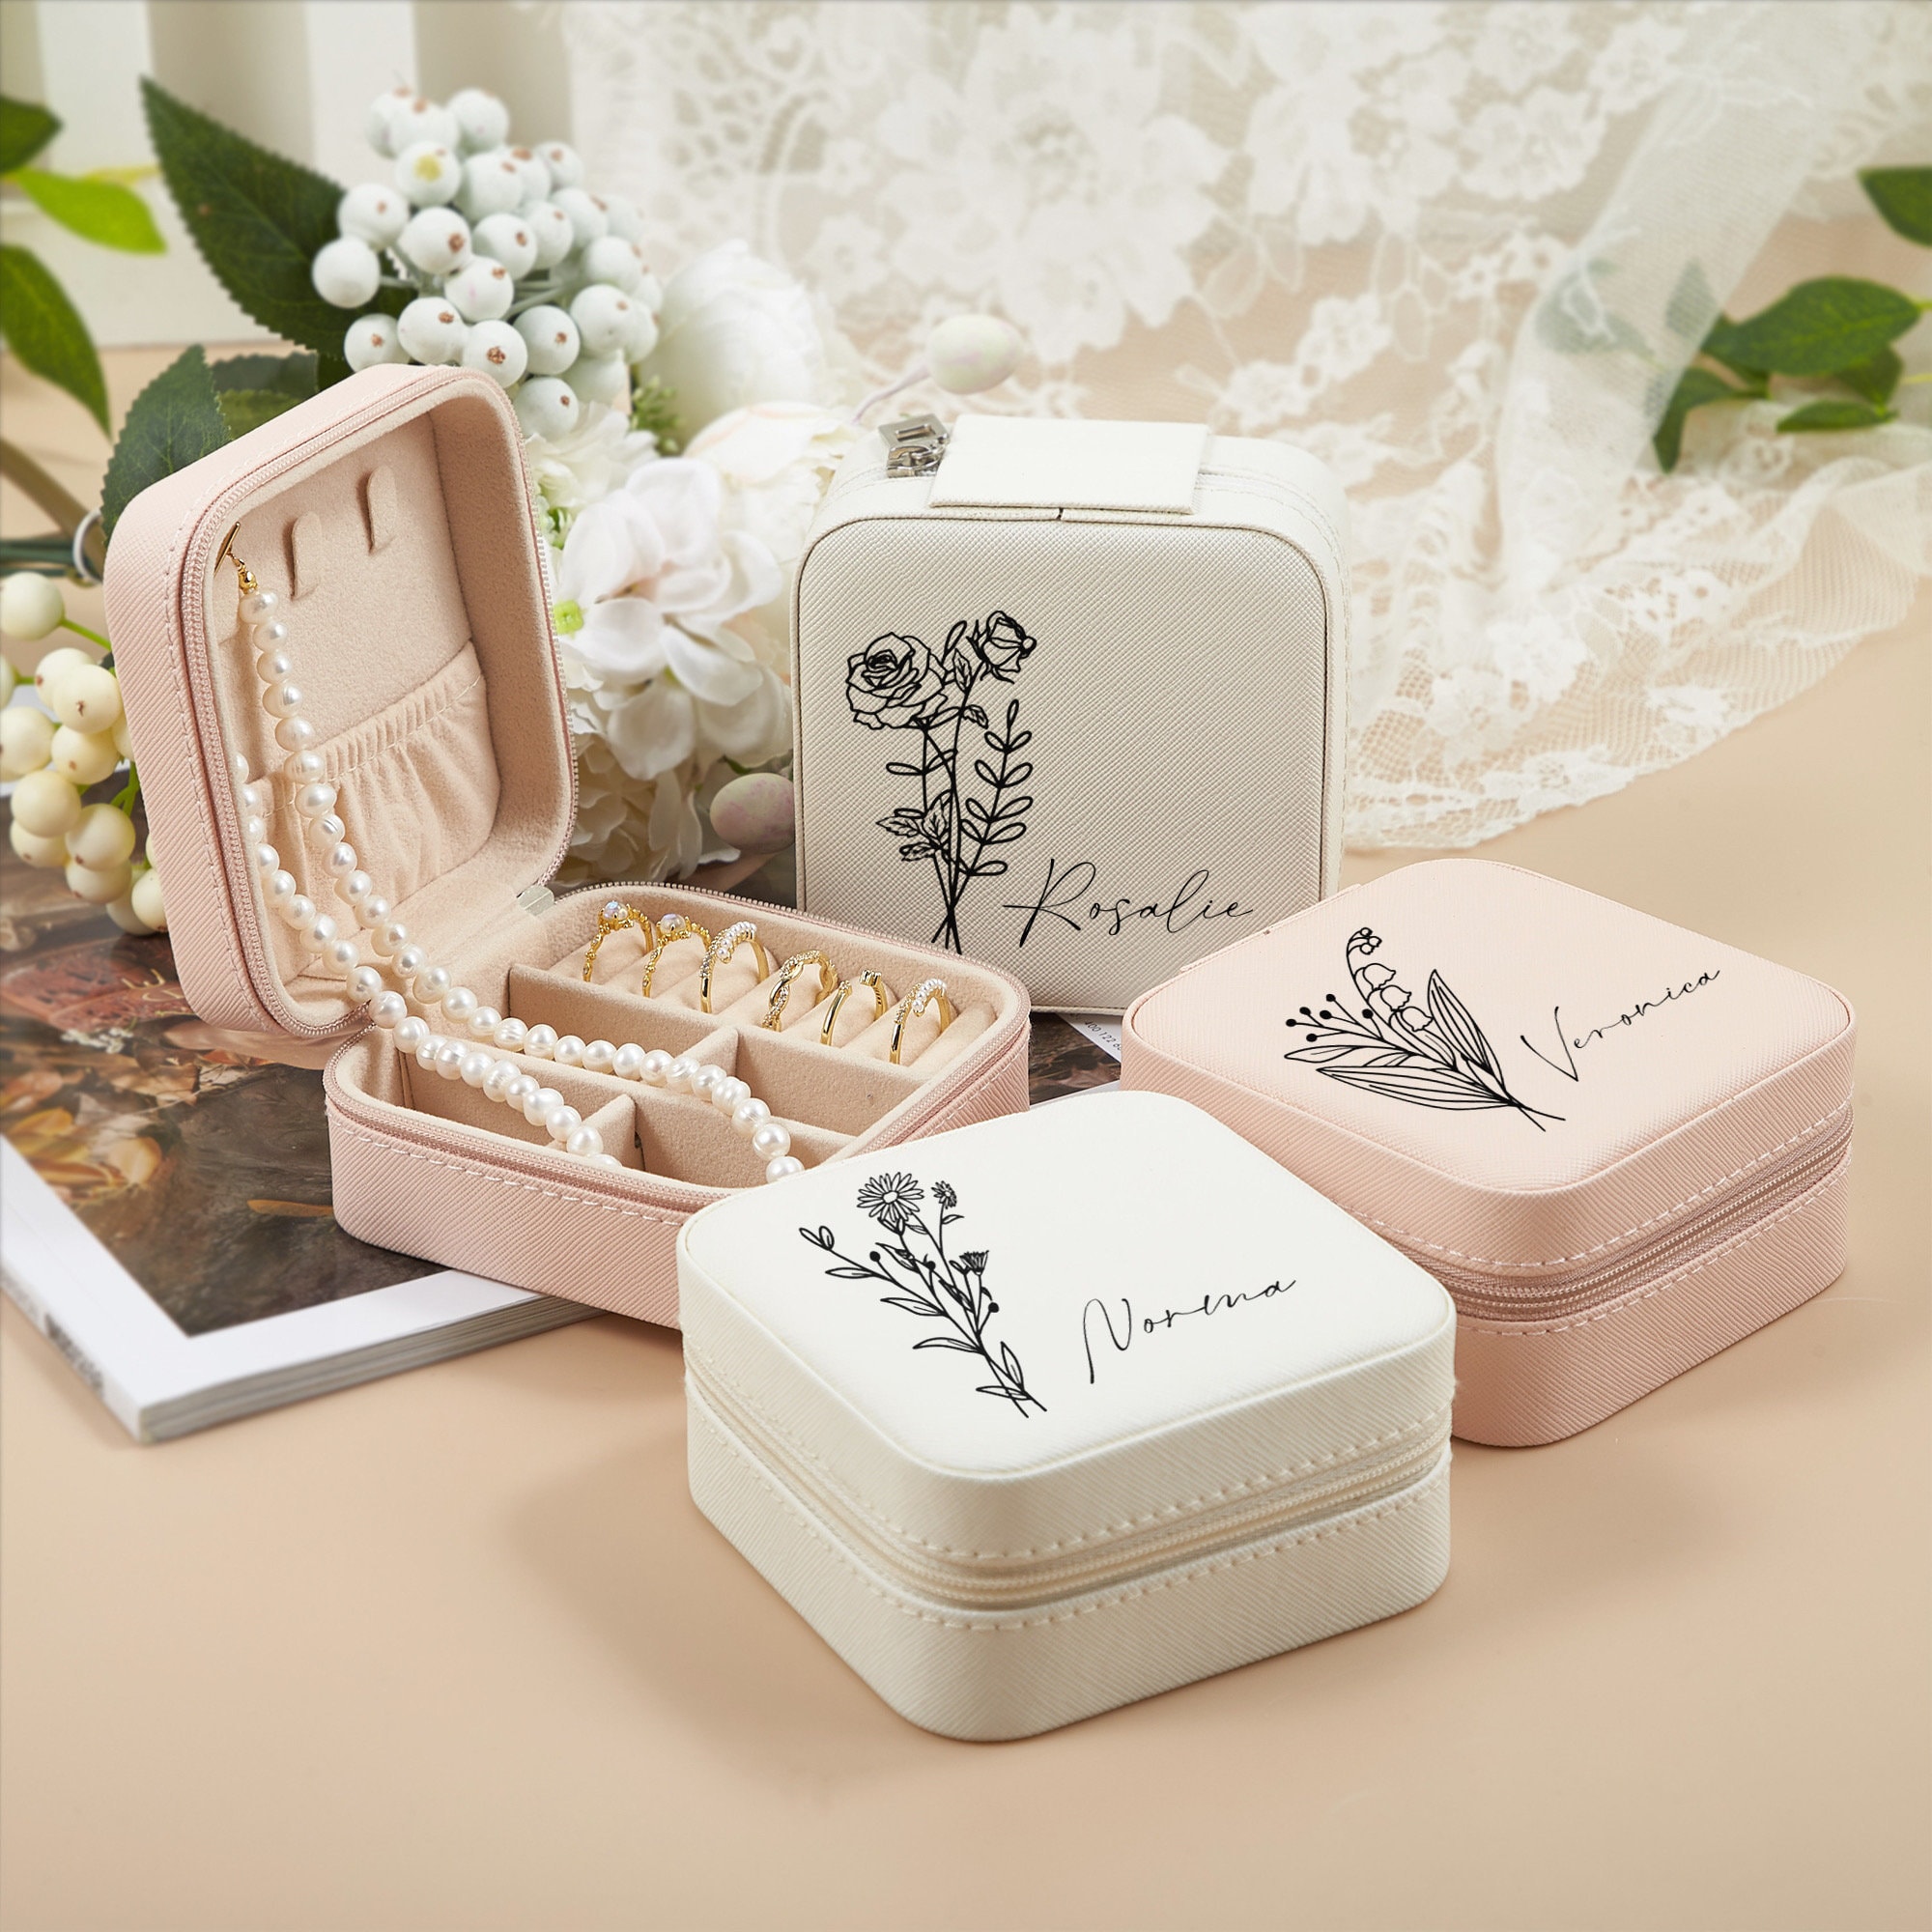 My Personal Memories Custom Personalized Mini Travel Jewelry Box Holder  Case - Engraved and Monogrammed (Pink)